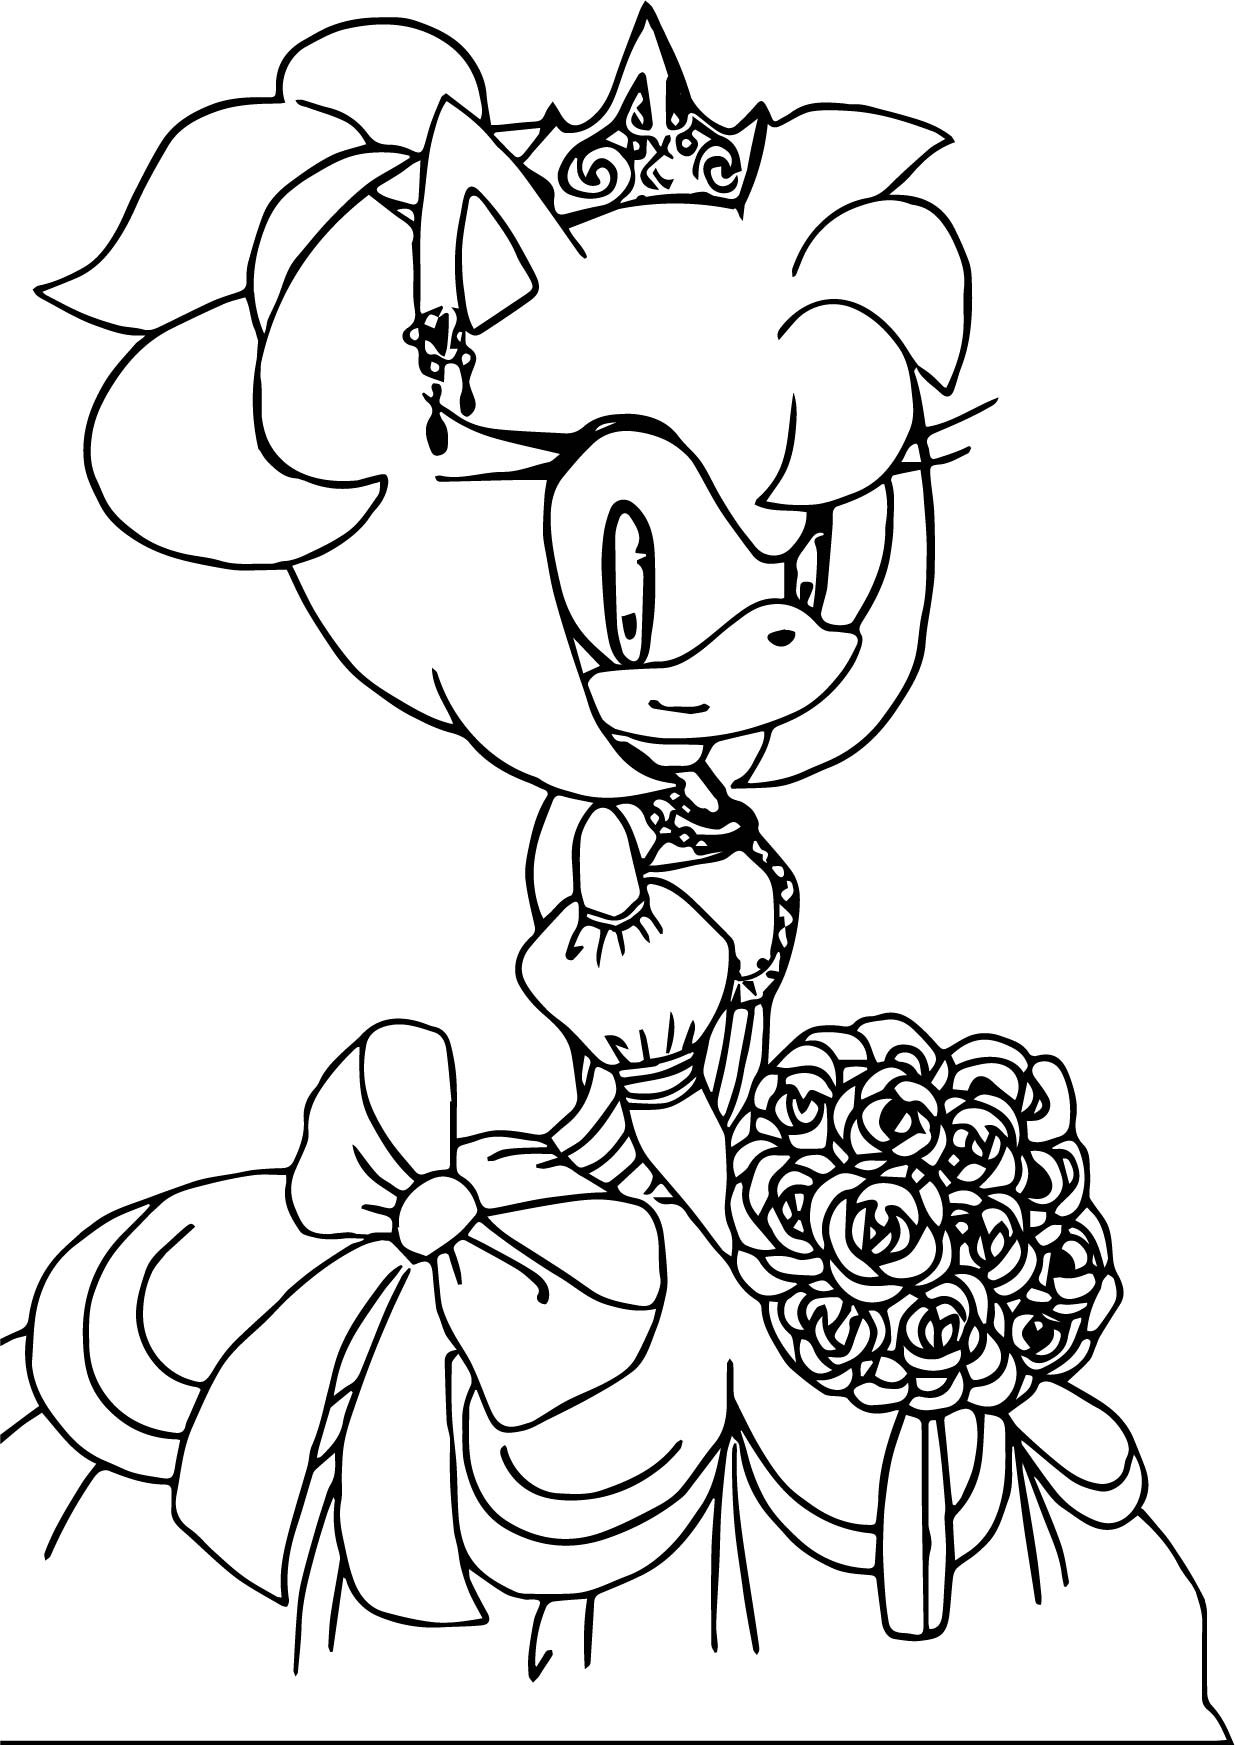 Rose Coloring Pages For Girls
 Amy Rose Wedding Girl Coloring Page